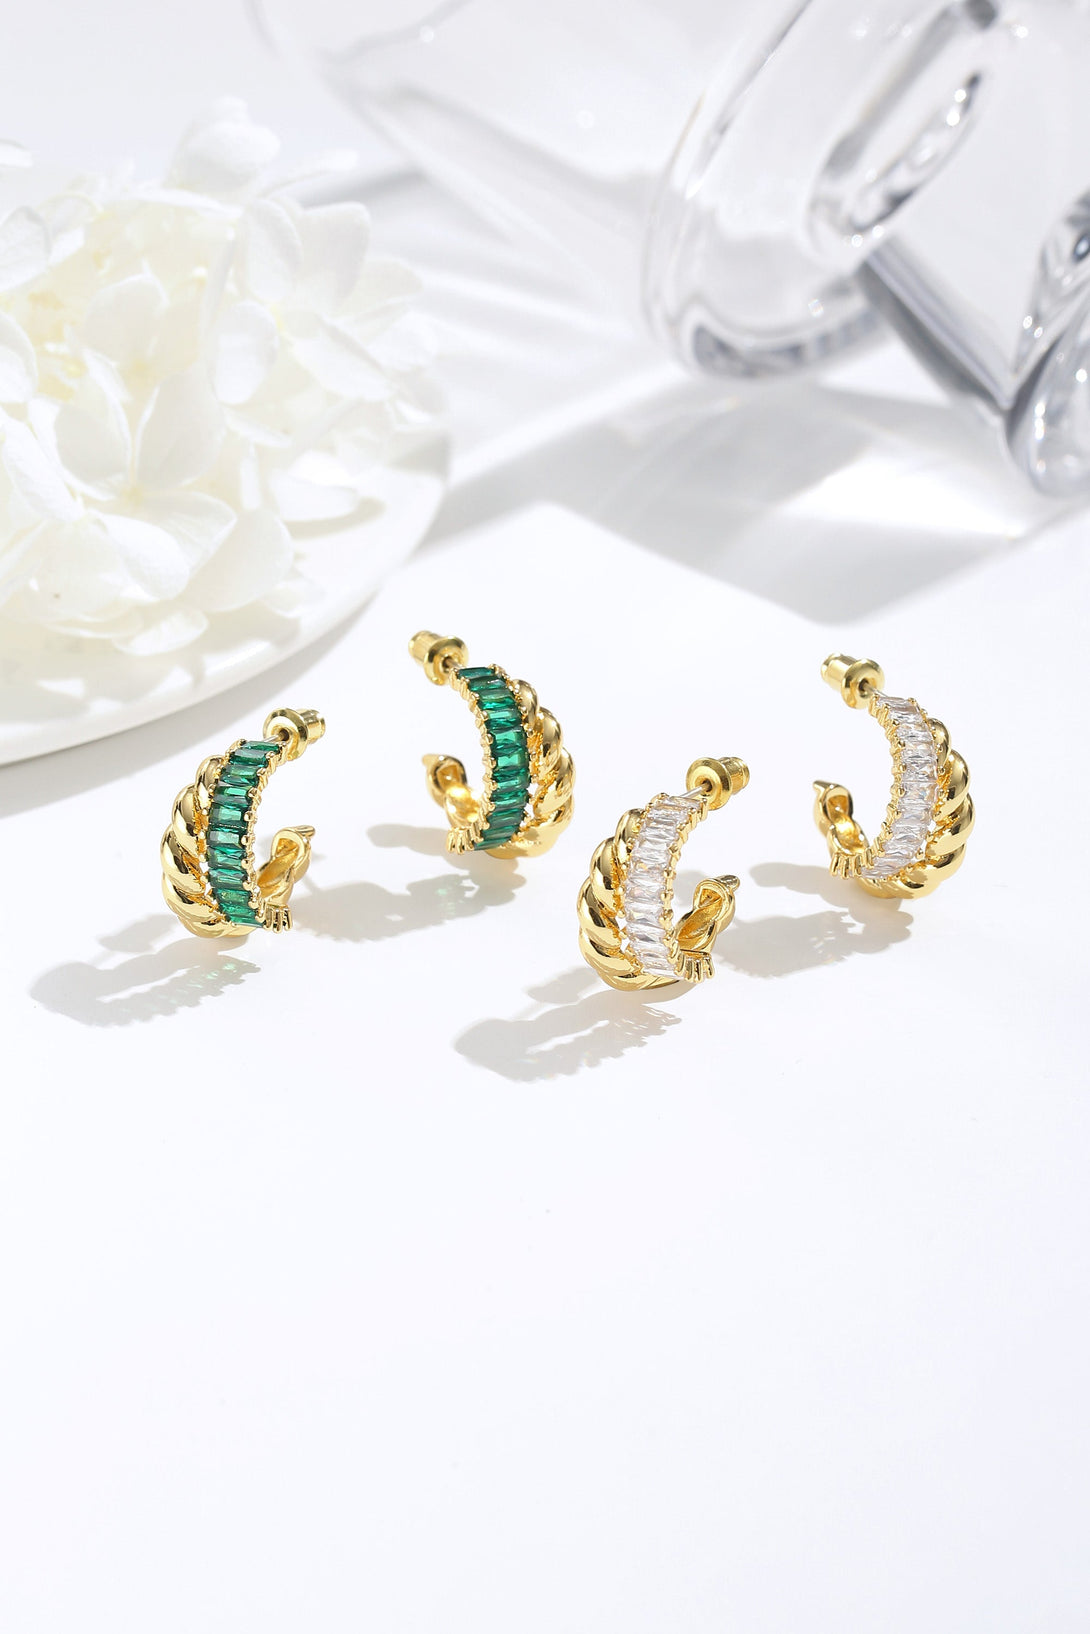 Gold Twisted White Clear Zirconia Hoop Earrings - Classicharms